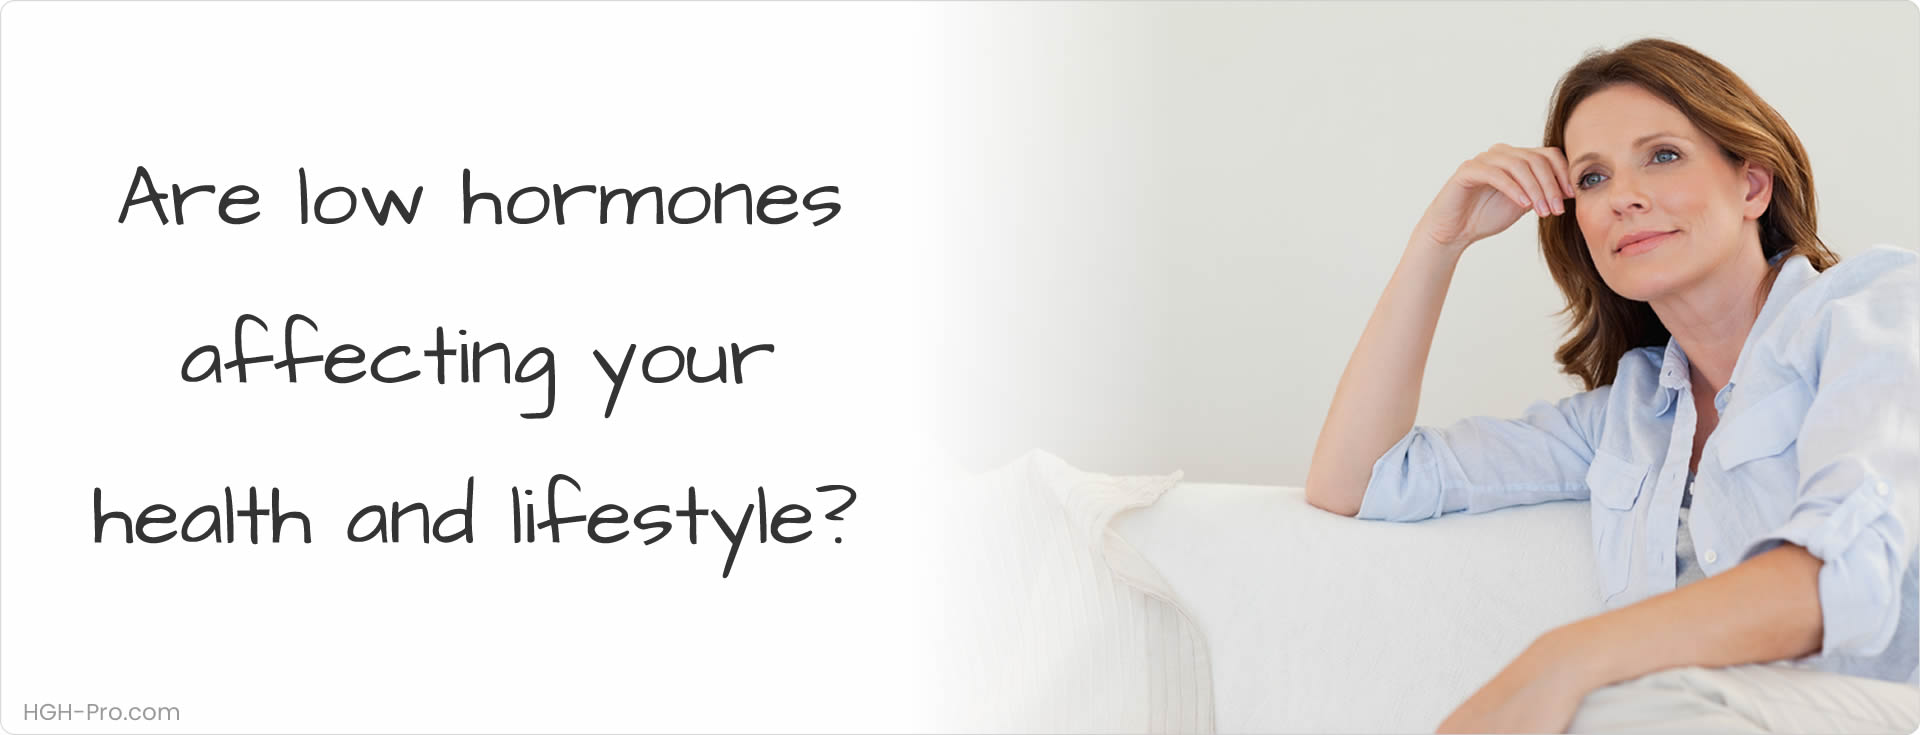 Are low hormones affecting your health and lifestyle?